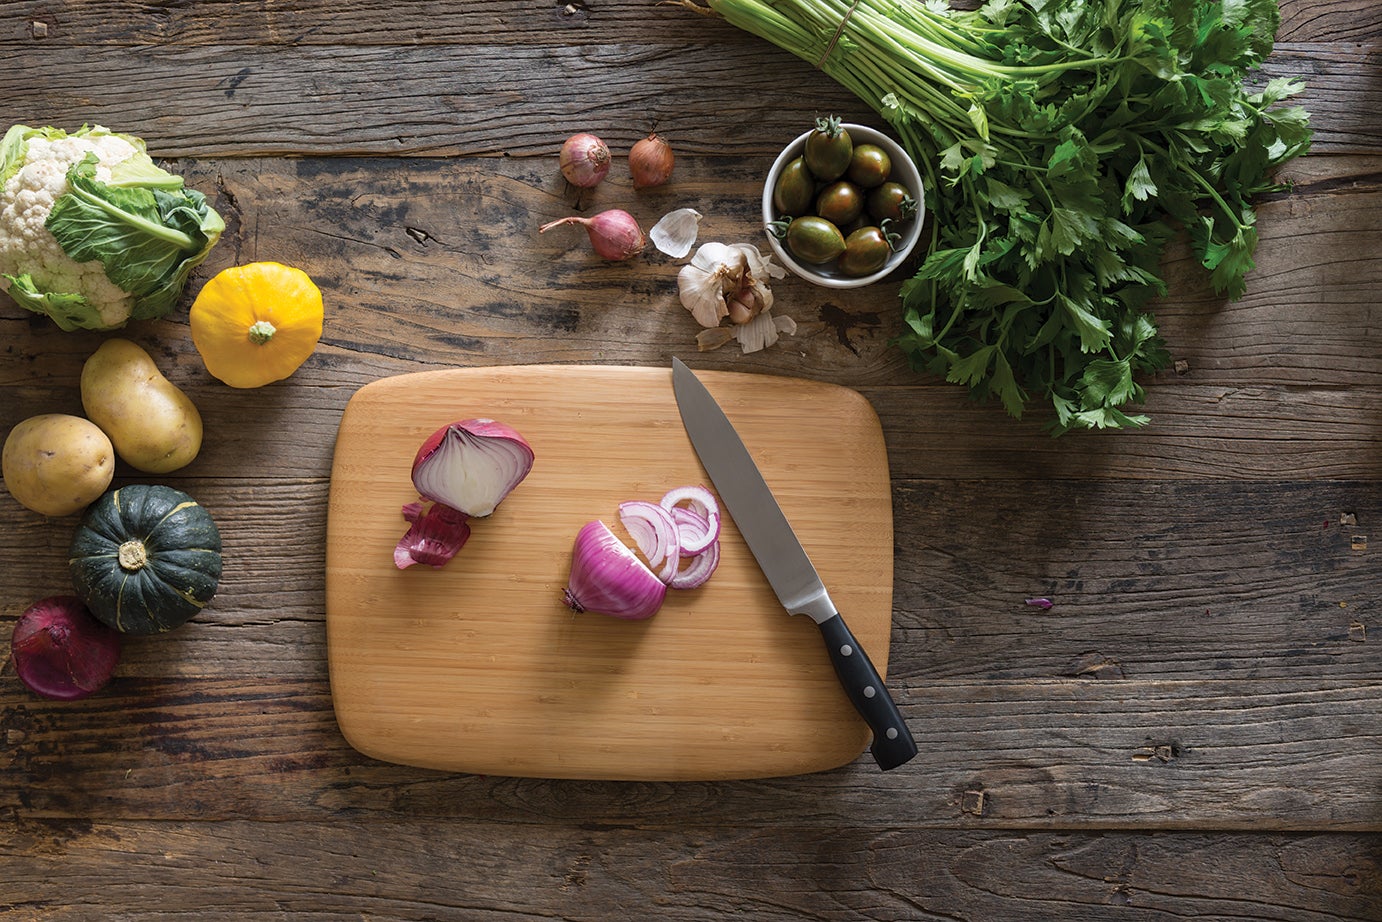 A Medium Classic Bamboo Cutting and Serving Board is shown with a knife that has been used to slice red onions. Assorted vegetables surround the cutting board.